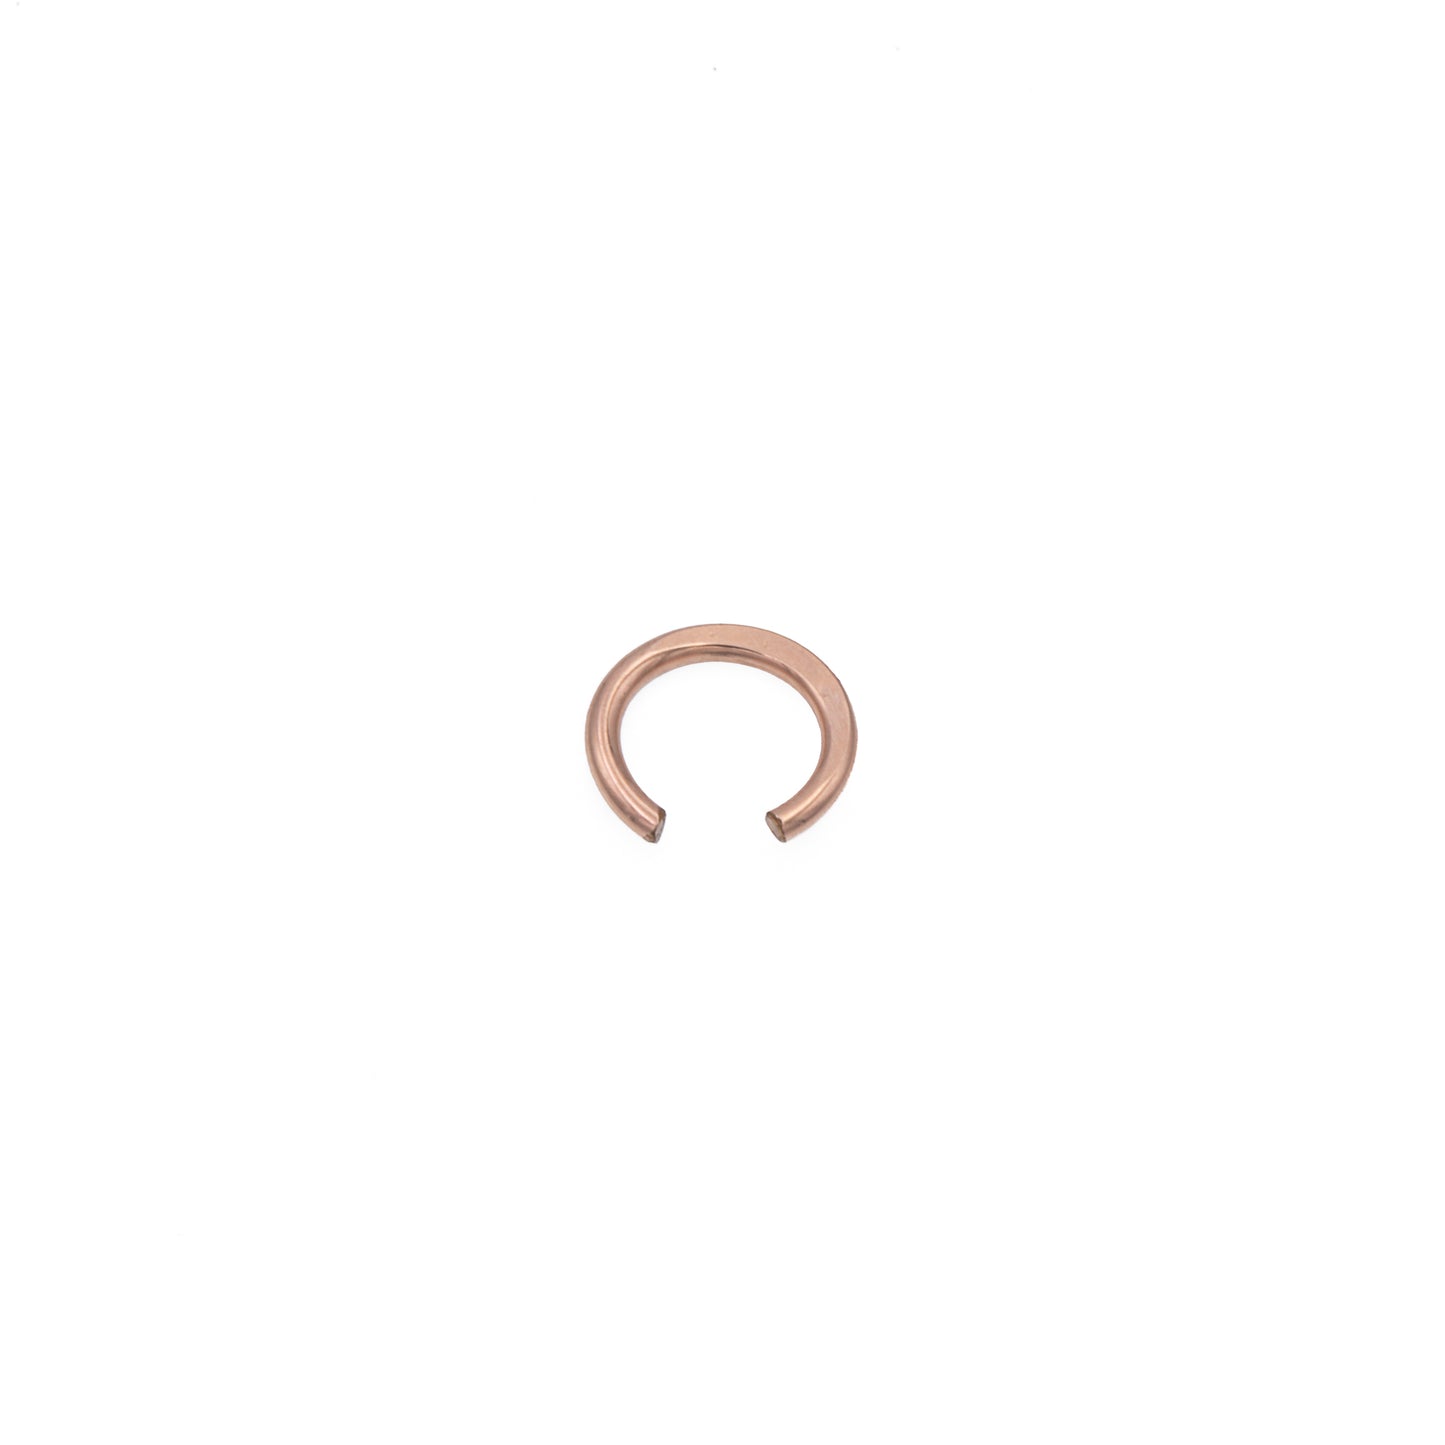 Zurina Ketola simple ear cuff in 14K rose  gold fill, viewed from above at a slight angle, on white background.